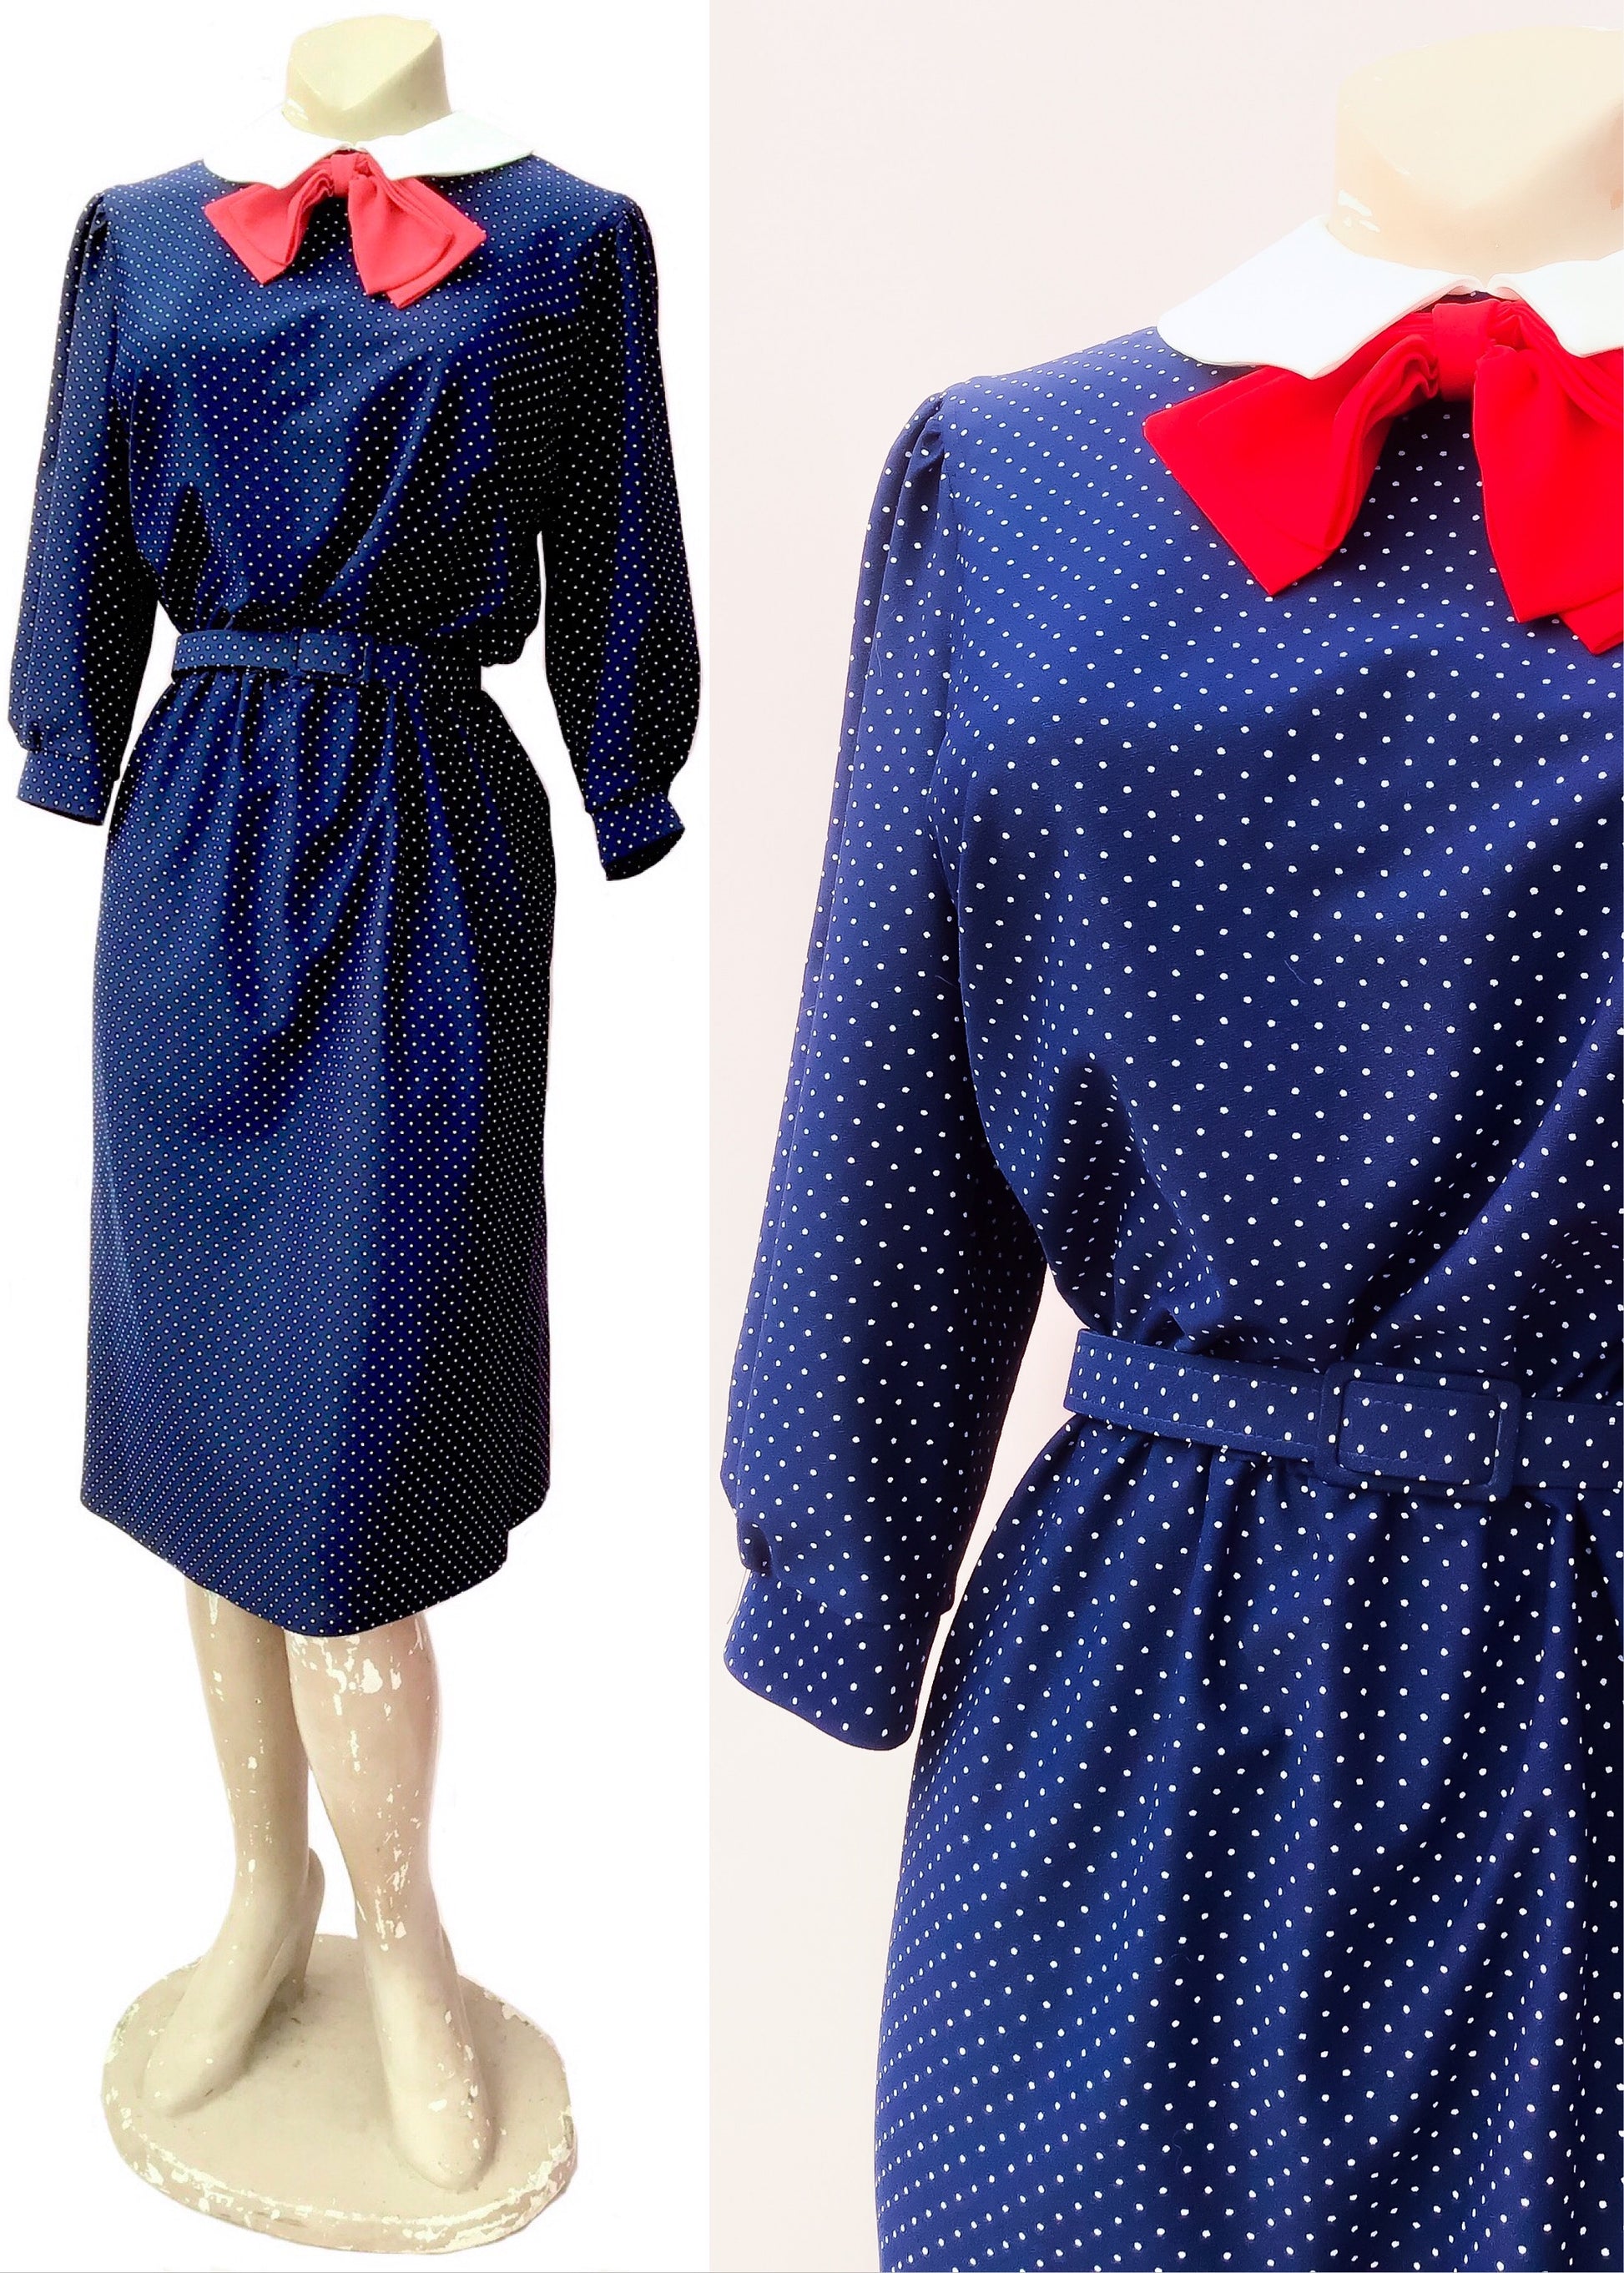 Late 70s blue spotty diana dress with peter pan collar and red bow, matching belt at the waist